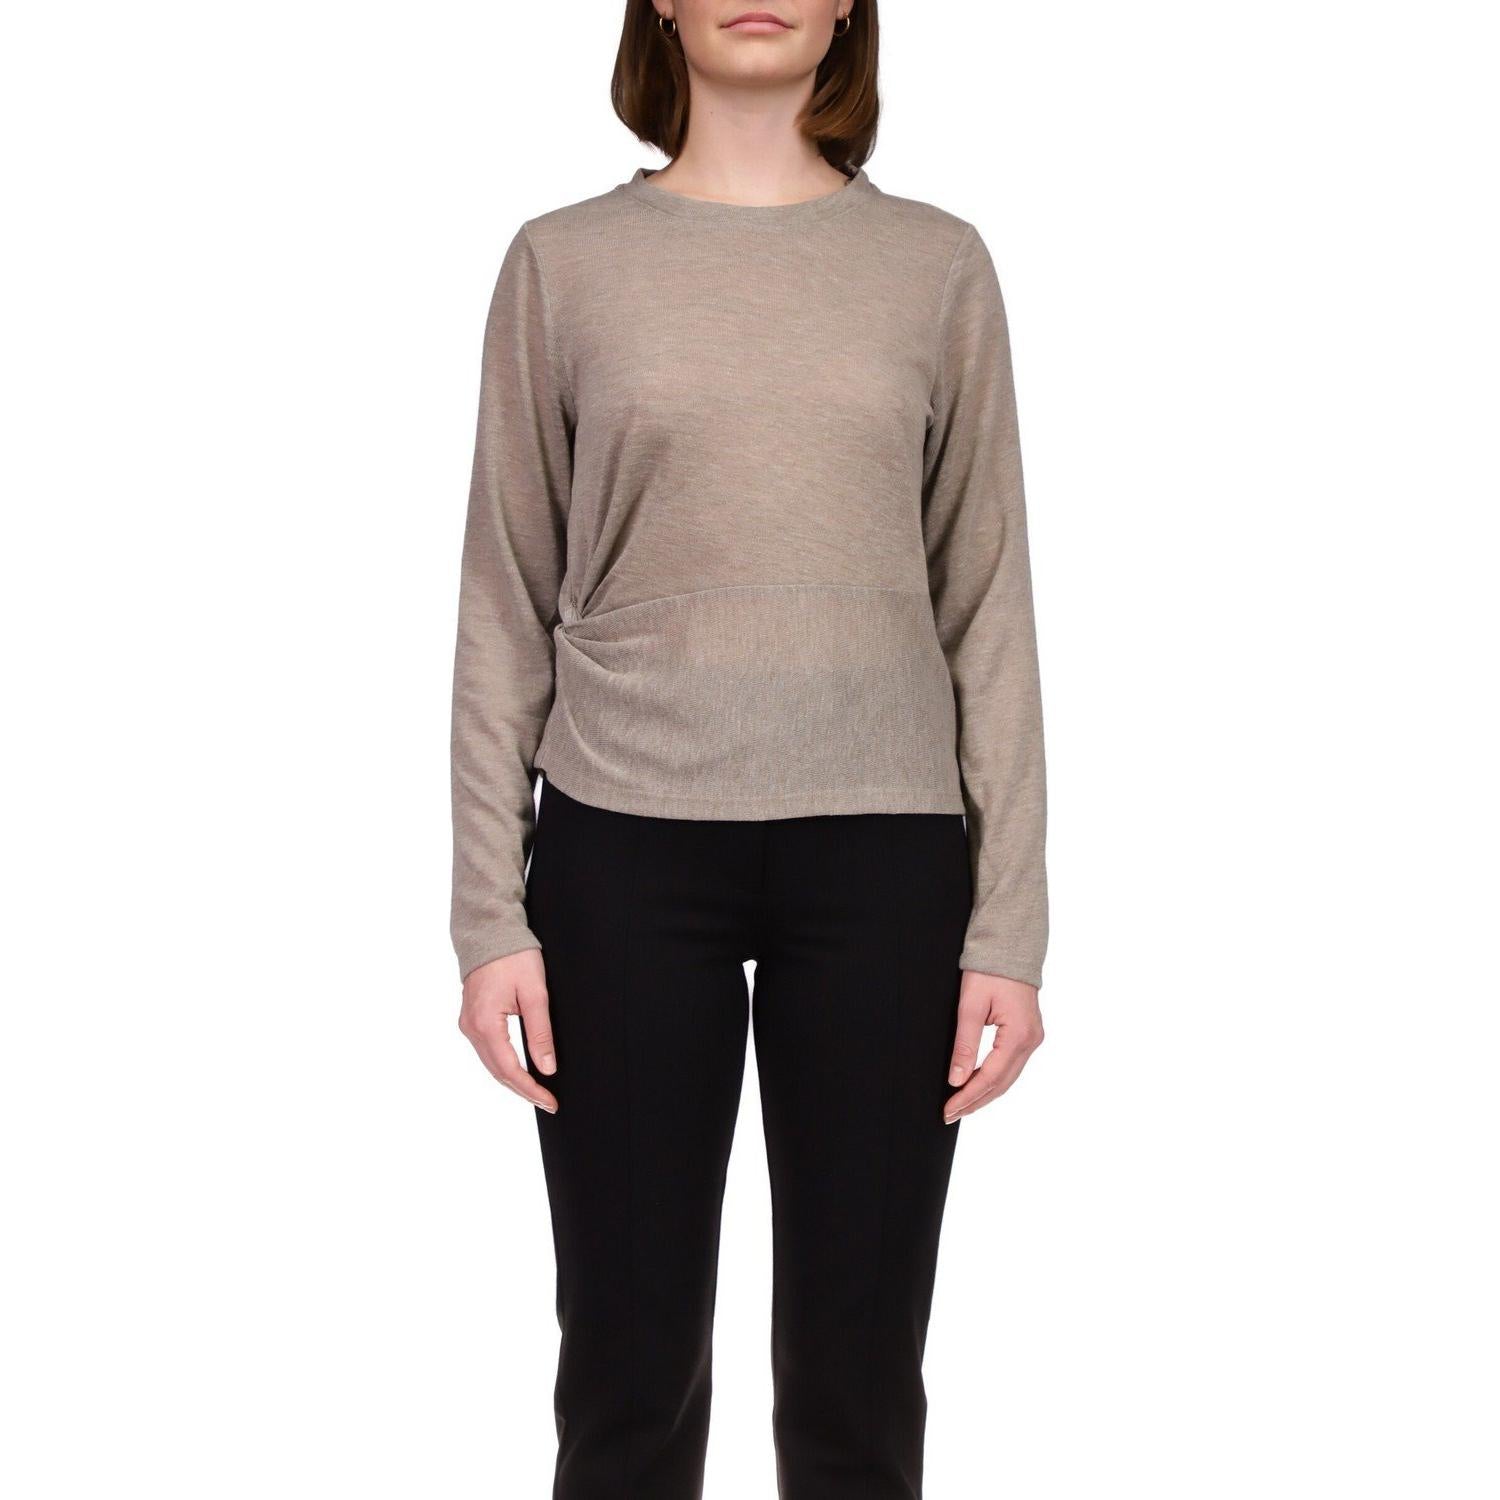 Sanctuary - Knot Your Business Top in Heather Canteen-SQ0989191